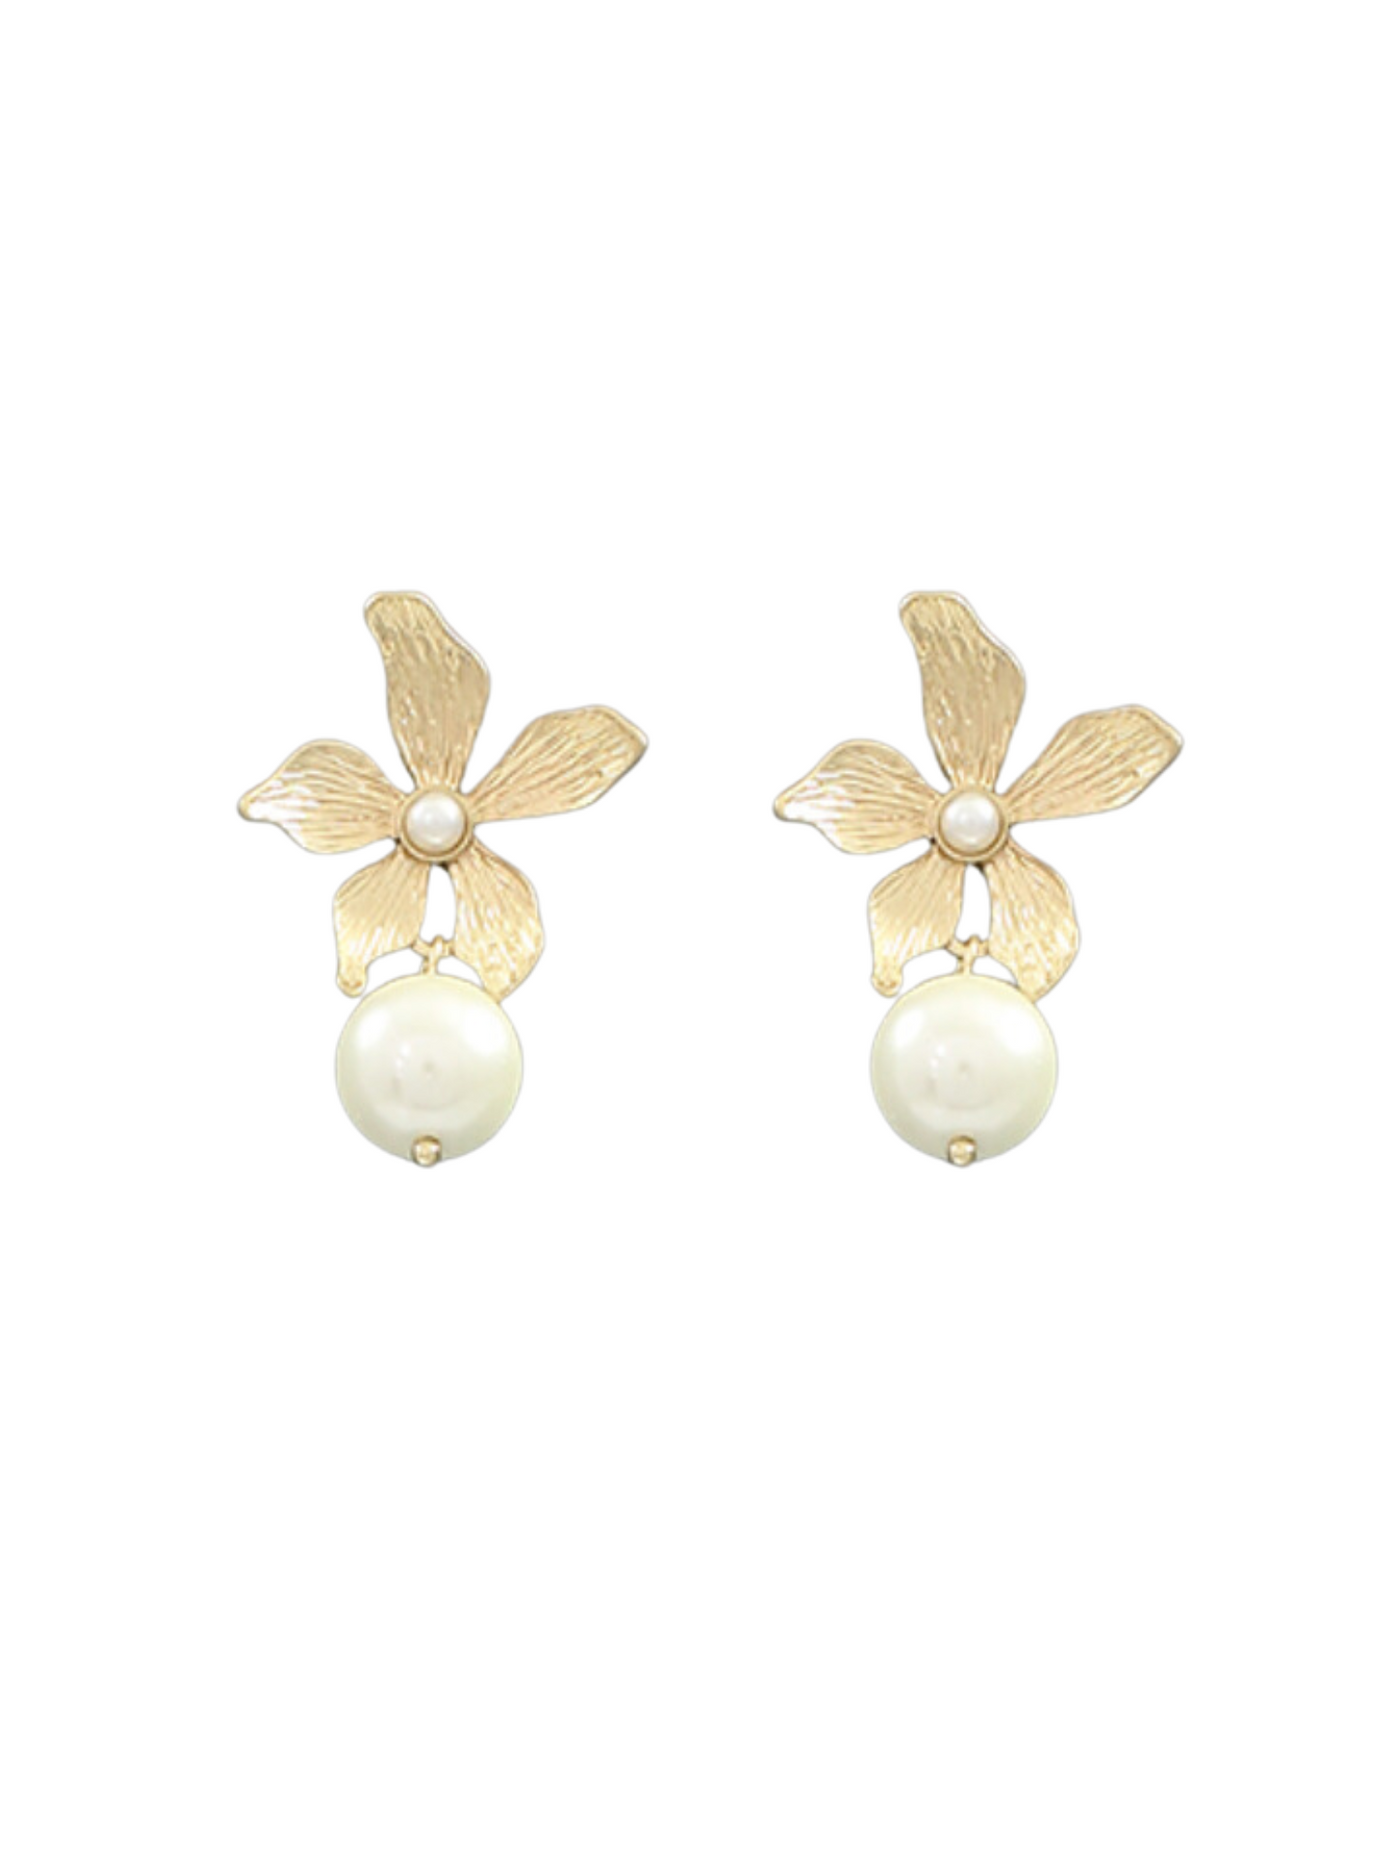 Flower and Pearl Drop Earrings on white background.